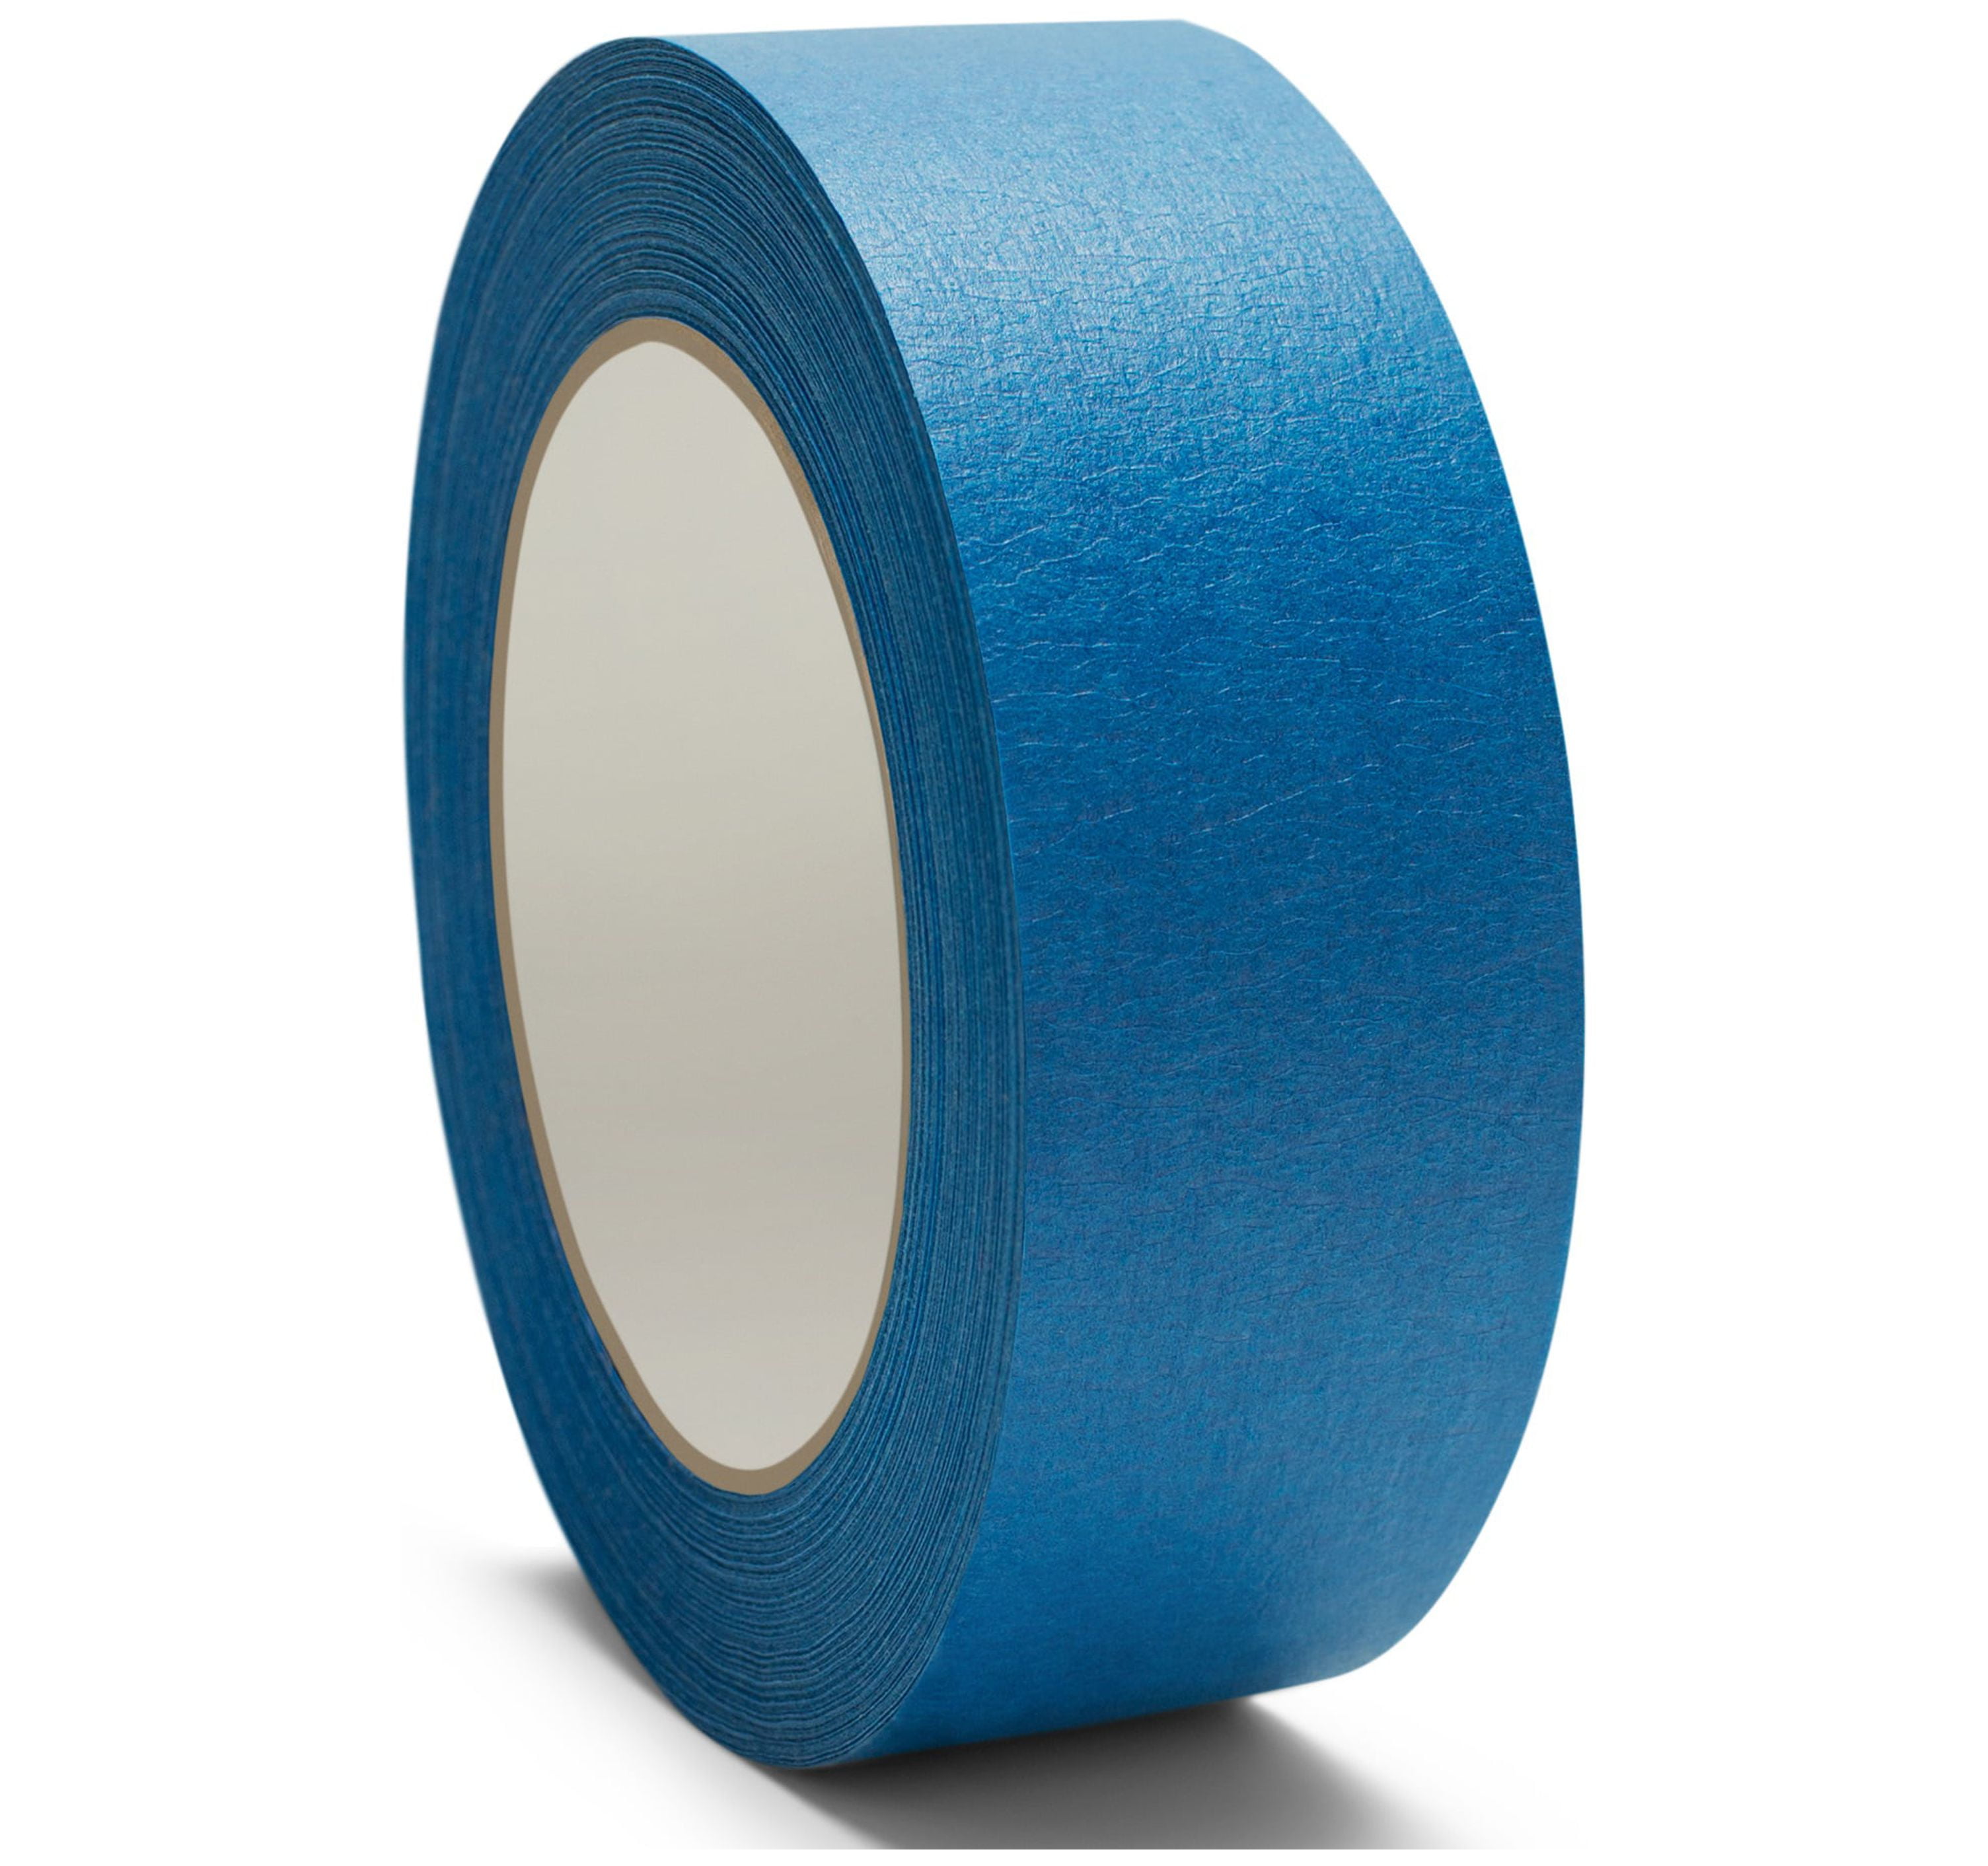 Painters Tape, Blue Masking Tape Roll, 2 Inch x 60 Yards, 1152 Pack